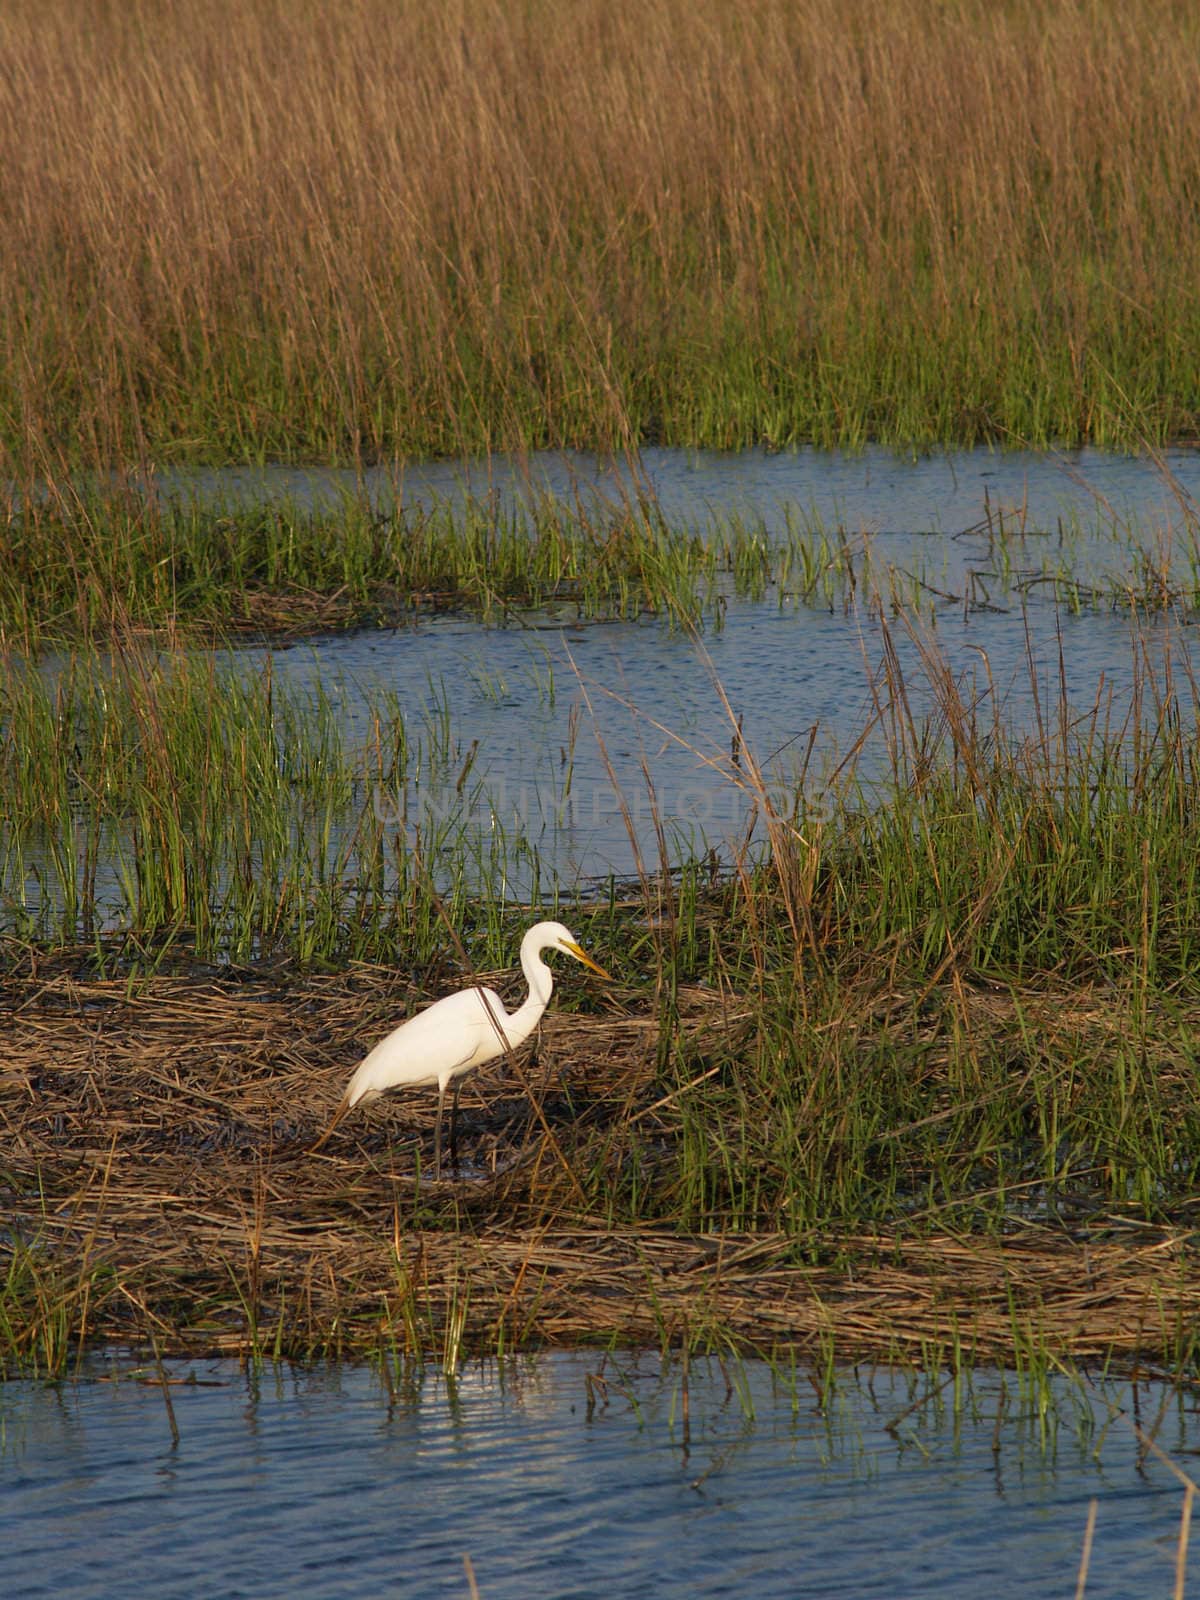 White egret standing in a reedy salt marsh near the coast. Copyspace for text. Vertical orientation.